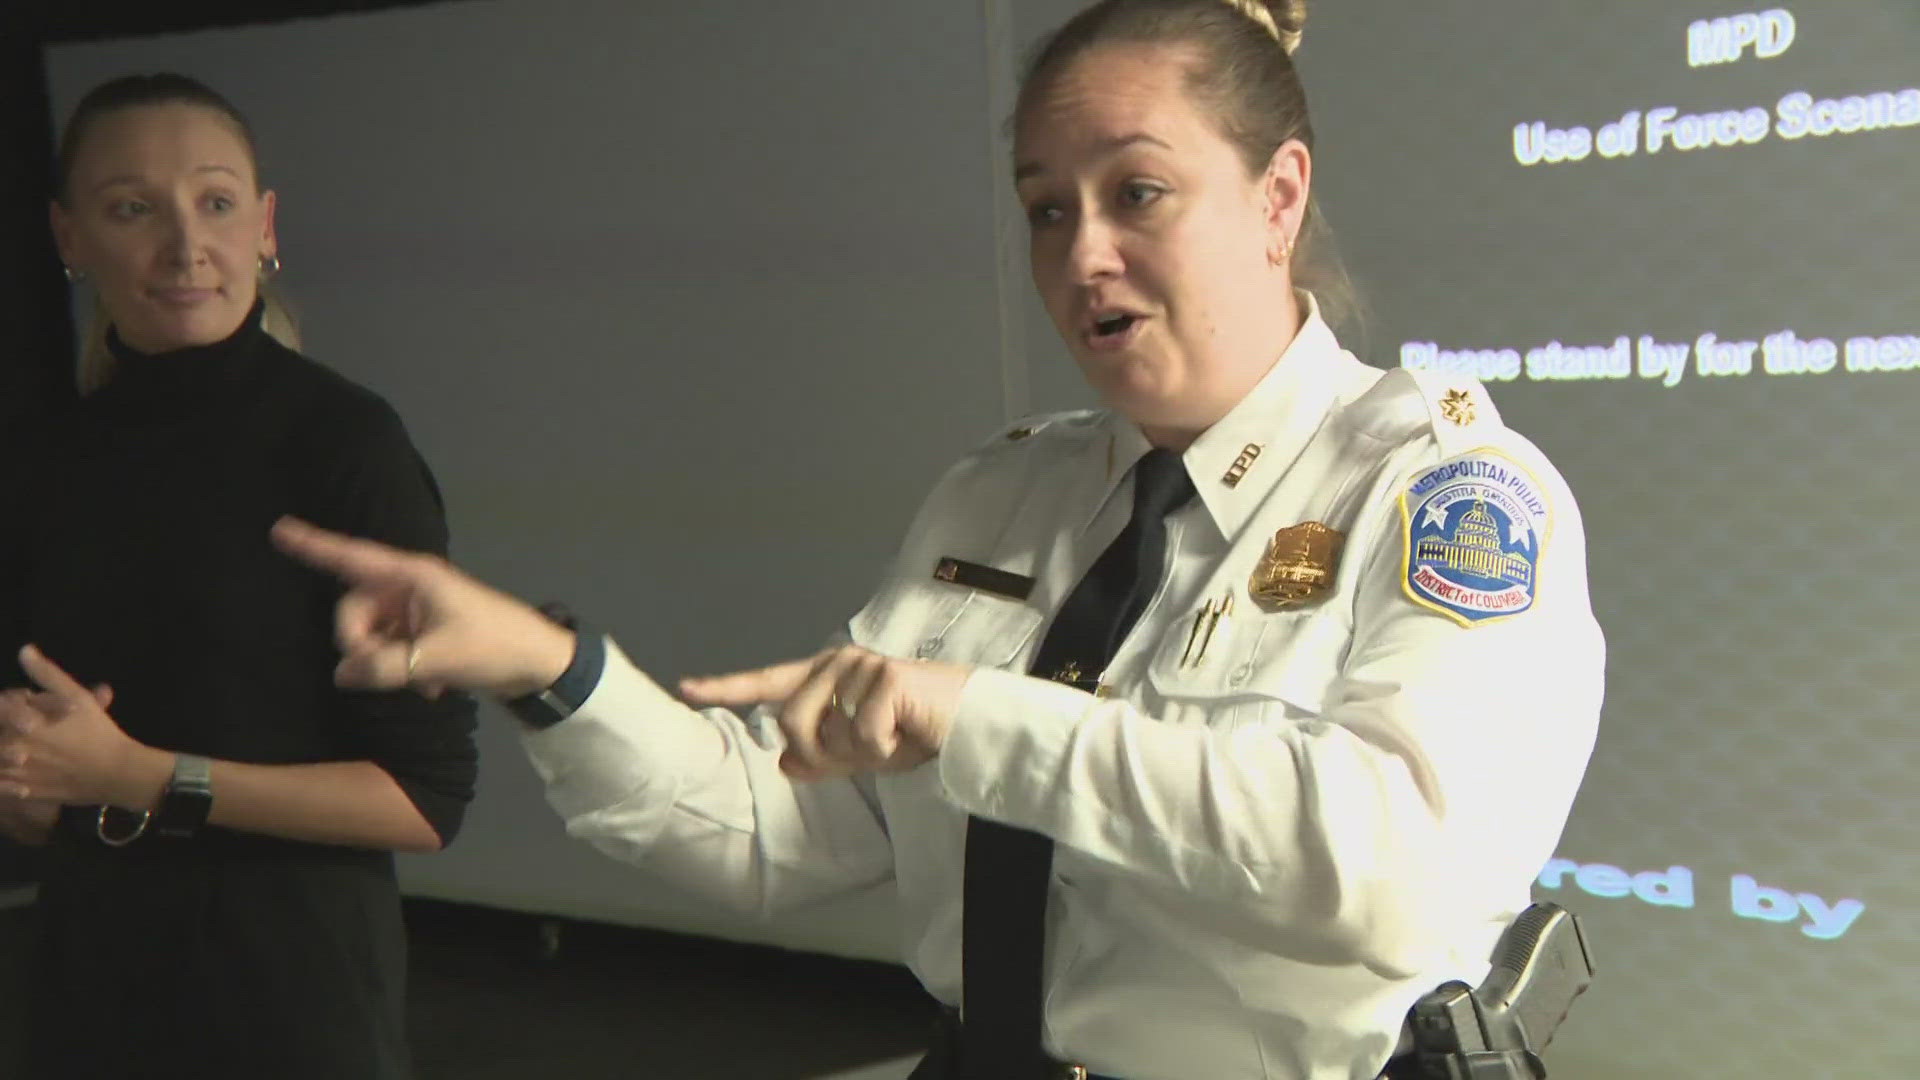 DC police's Deaf and Hard of Hearing Unit aims to connect the community.